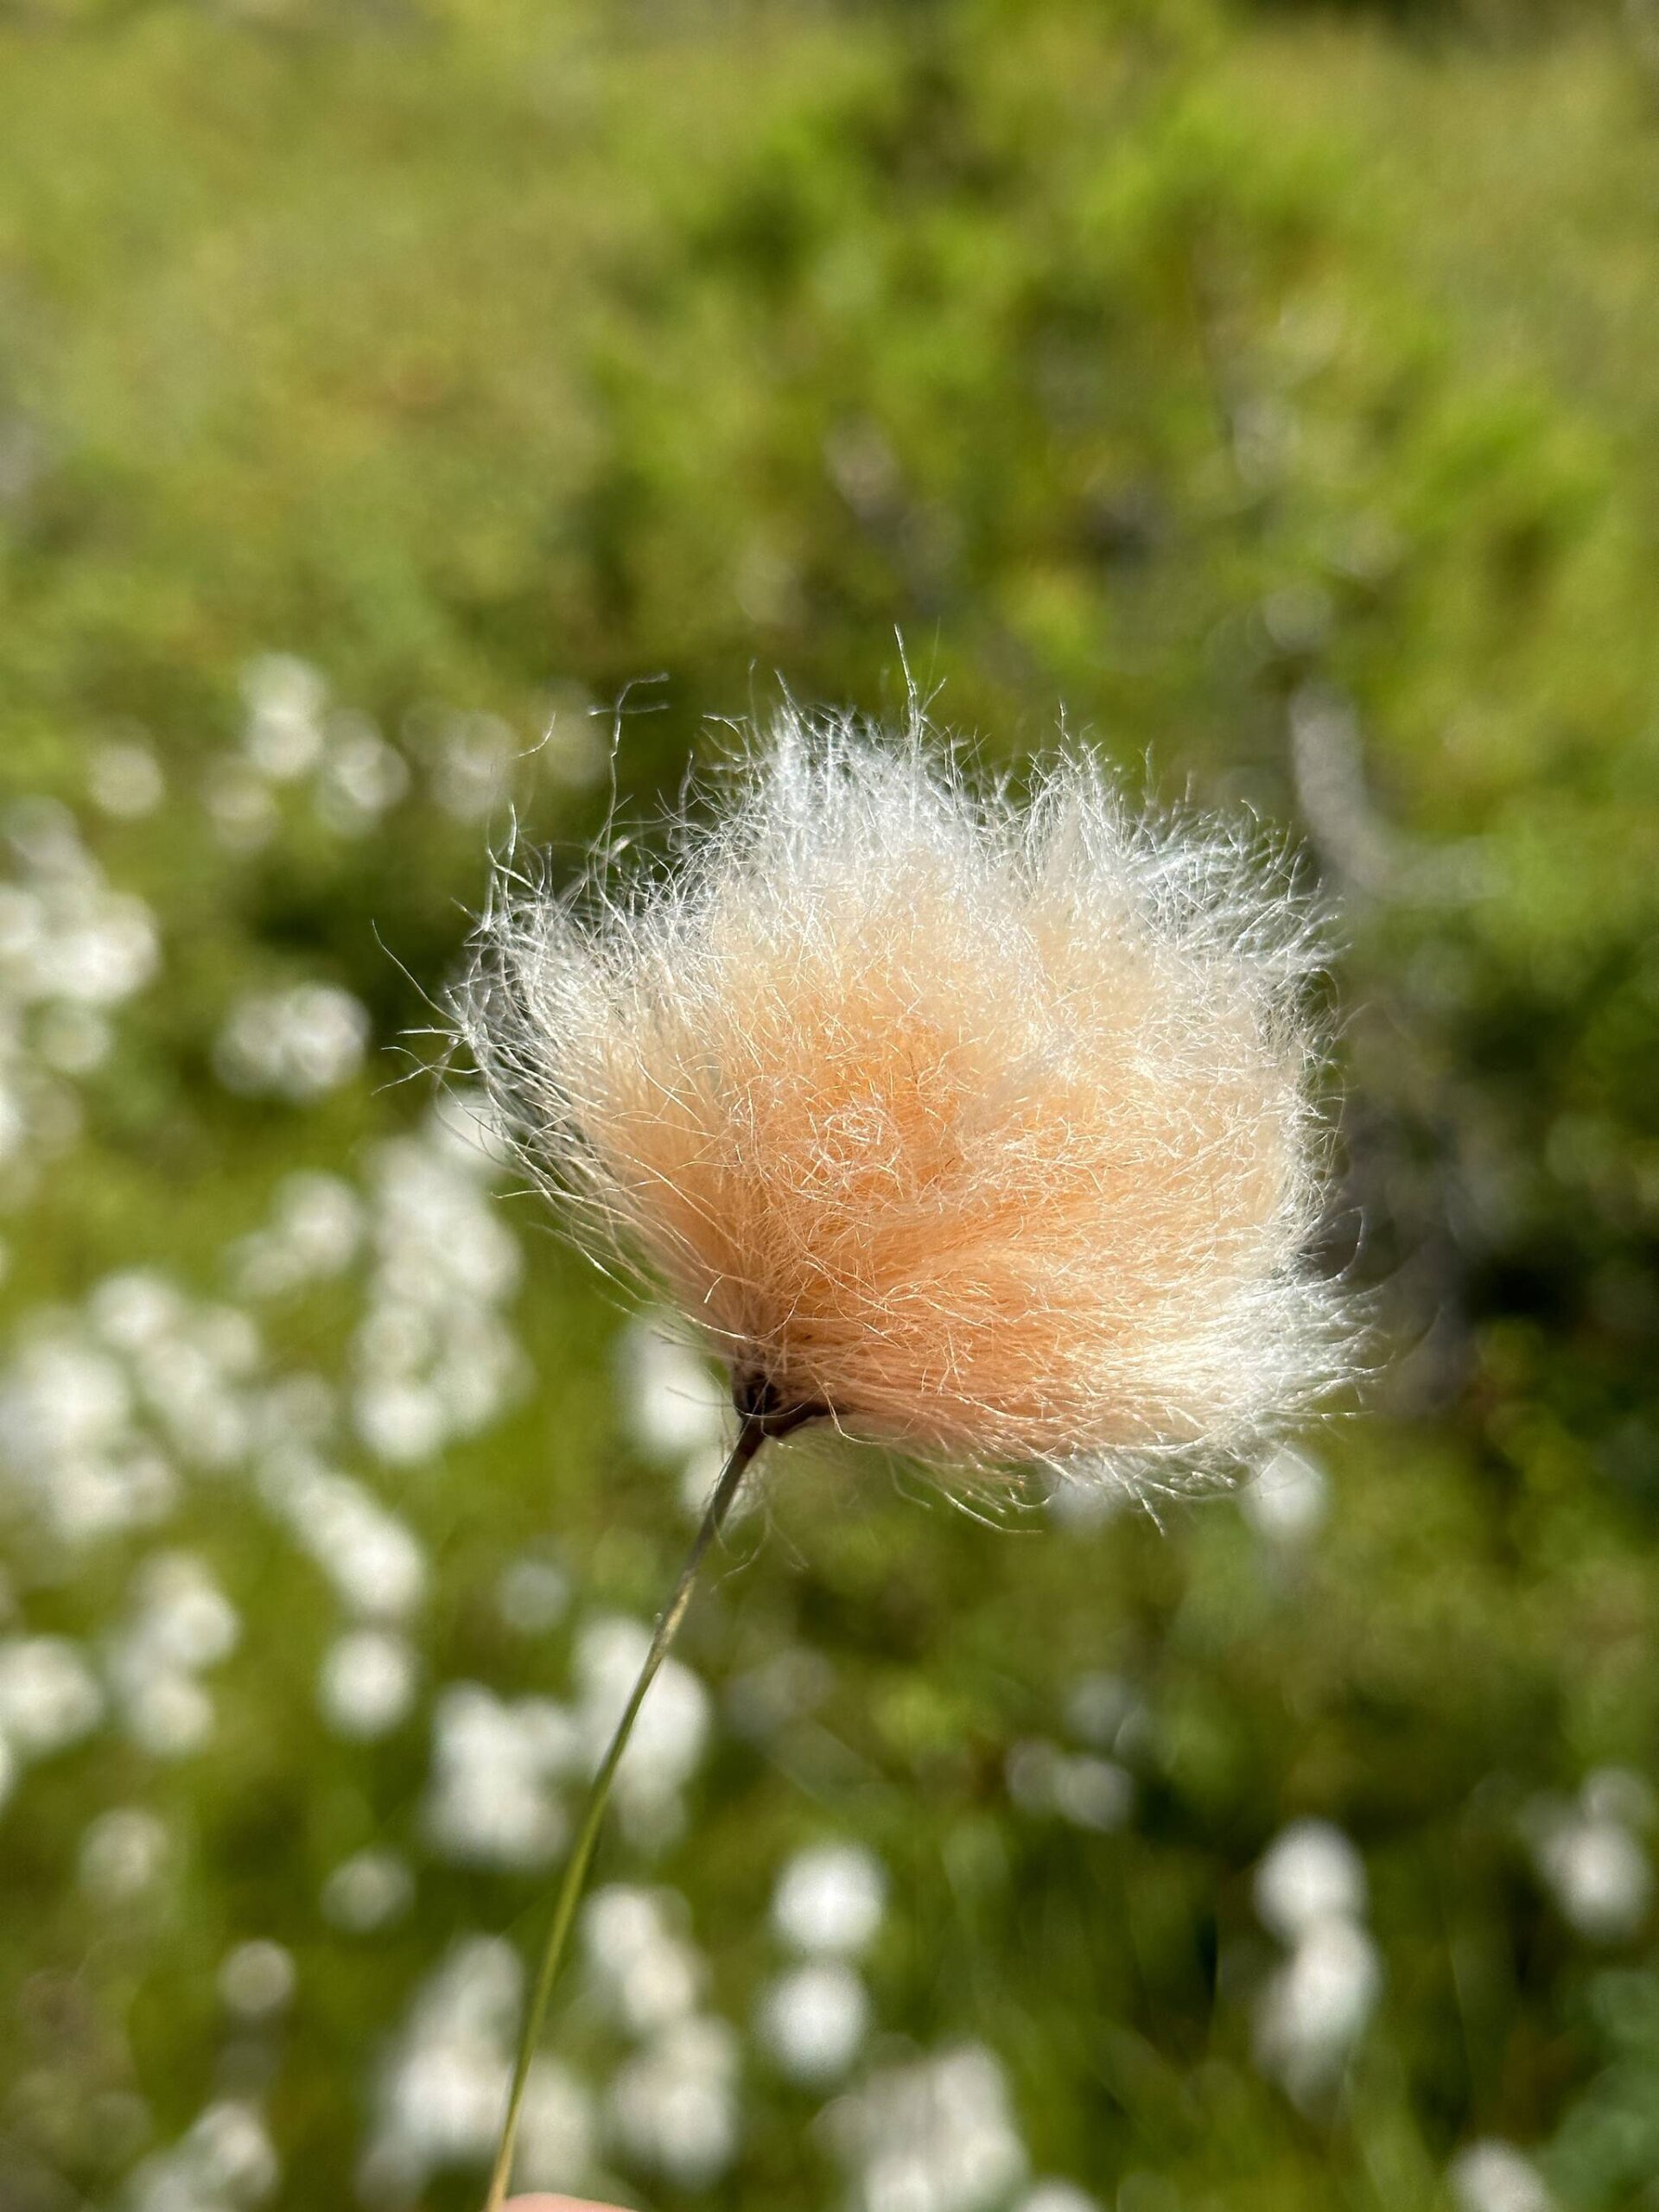 An Alaska cotton along the Horse Tram Trail on July 8. (Photo by Deana Barajas)